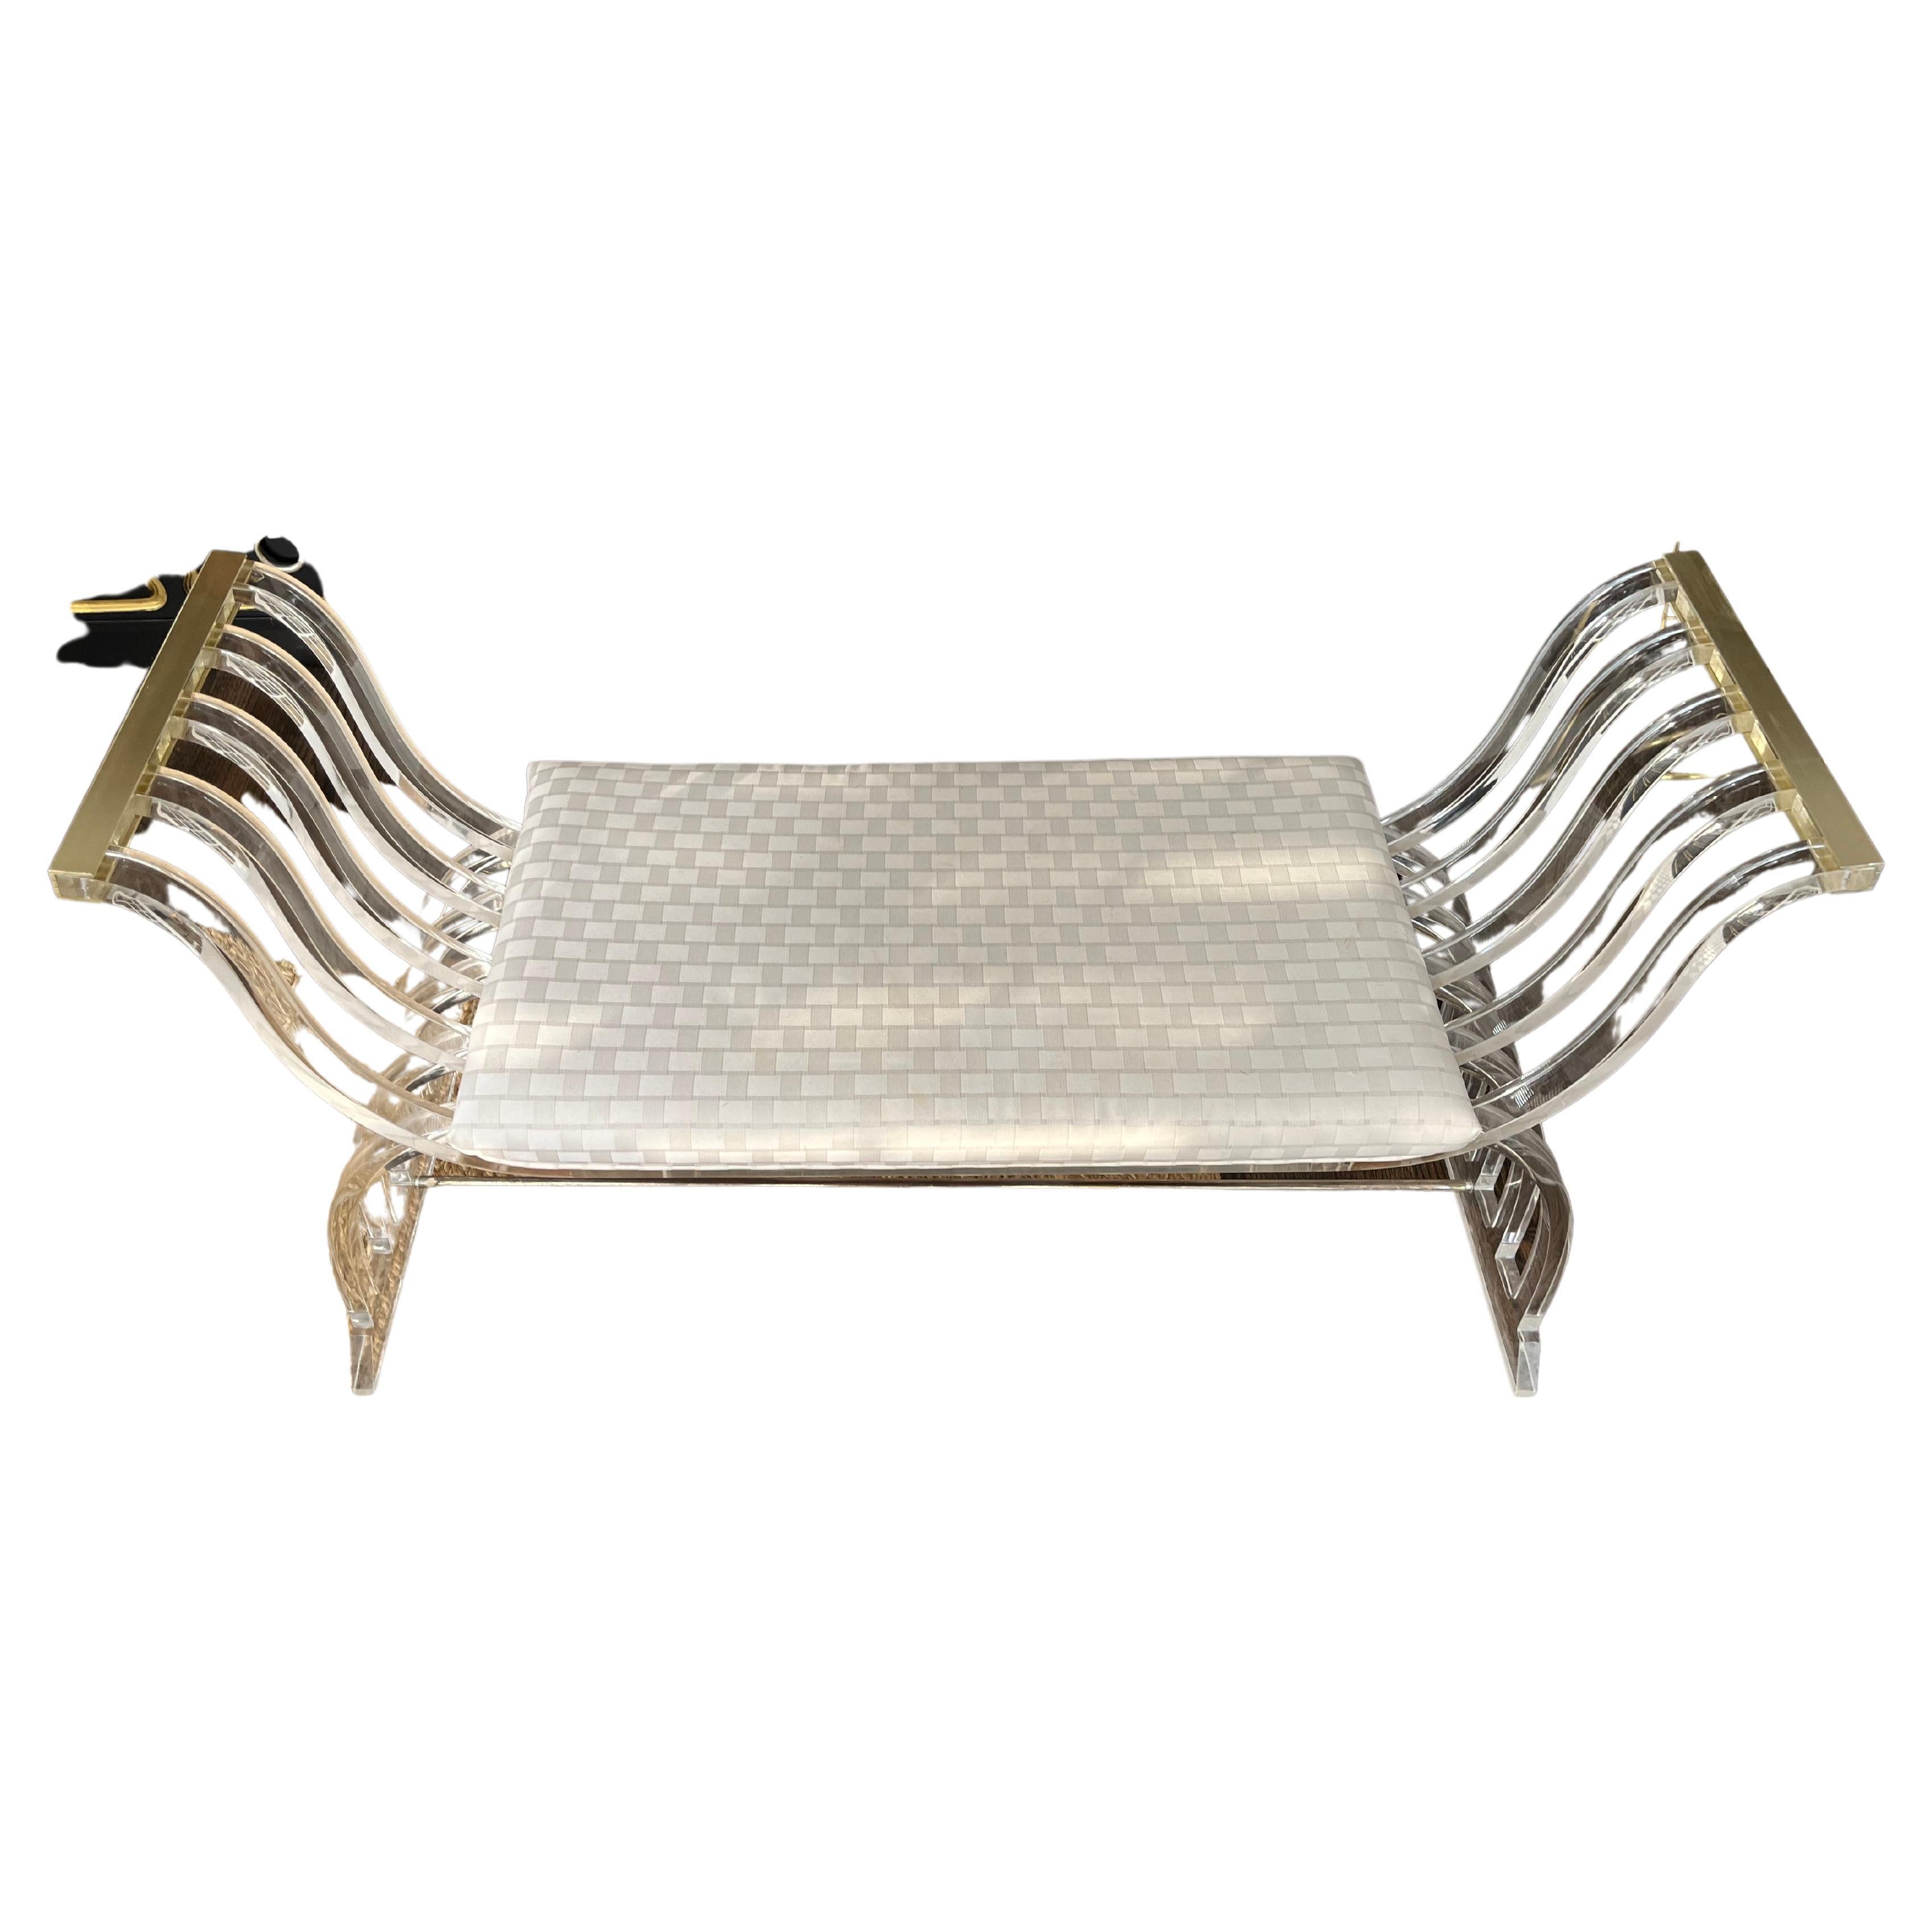 1970s Lucite and Upholstered Bench by Hill Manufacturing Corp.